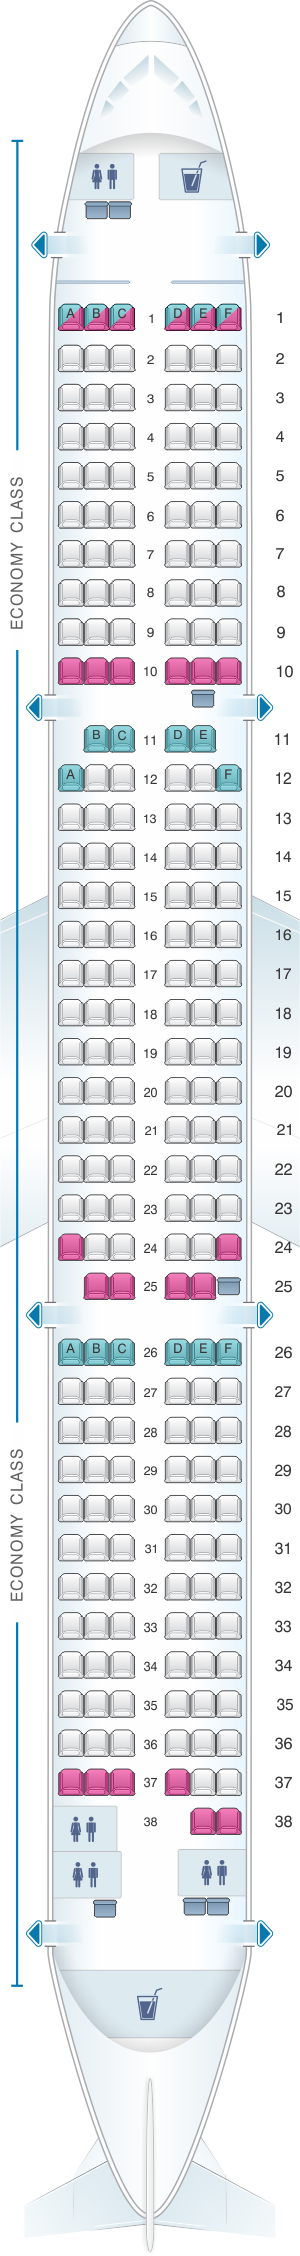 Seat map for Thomas Cook Airlines Airbus A321 200